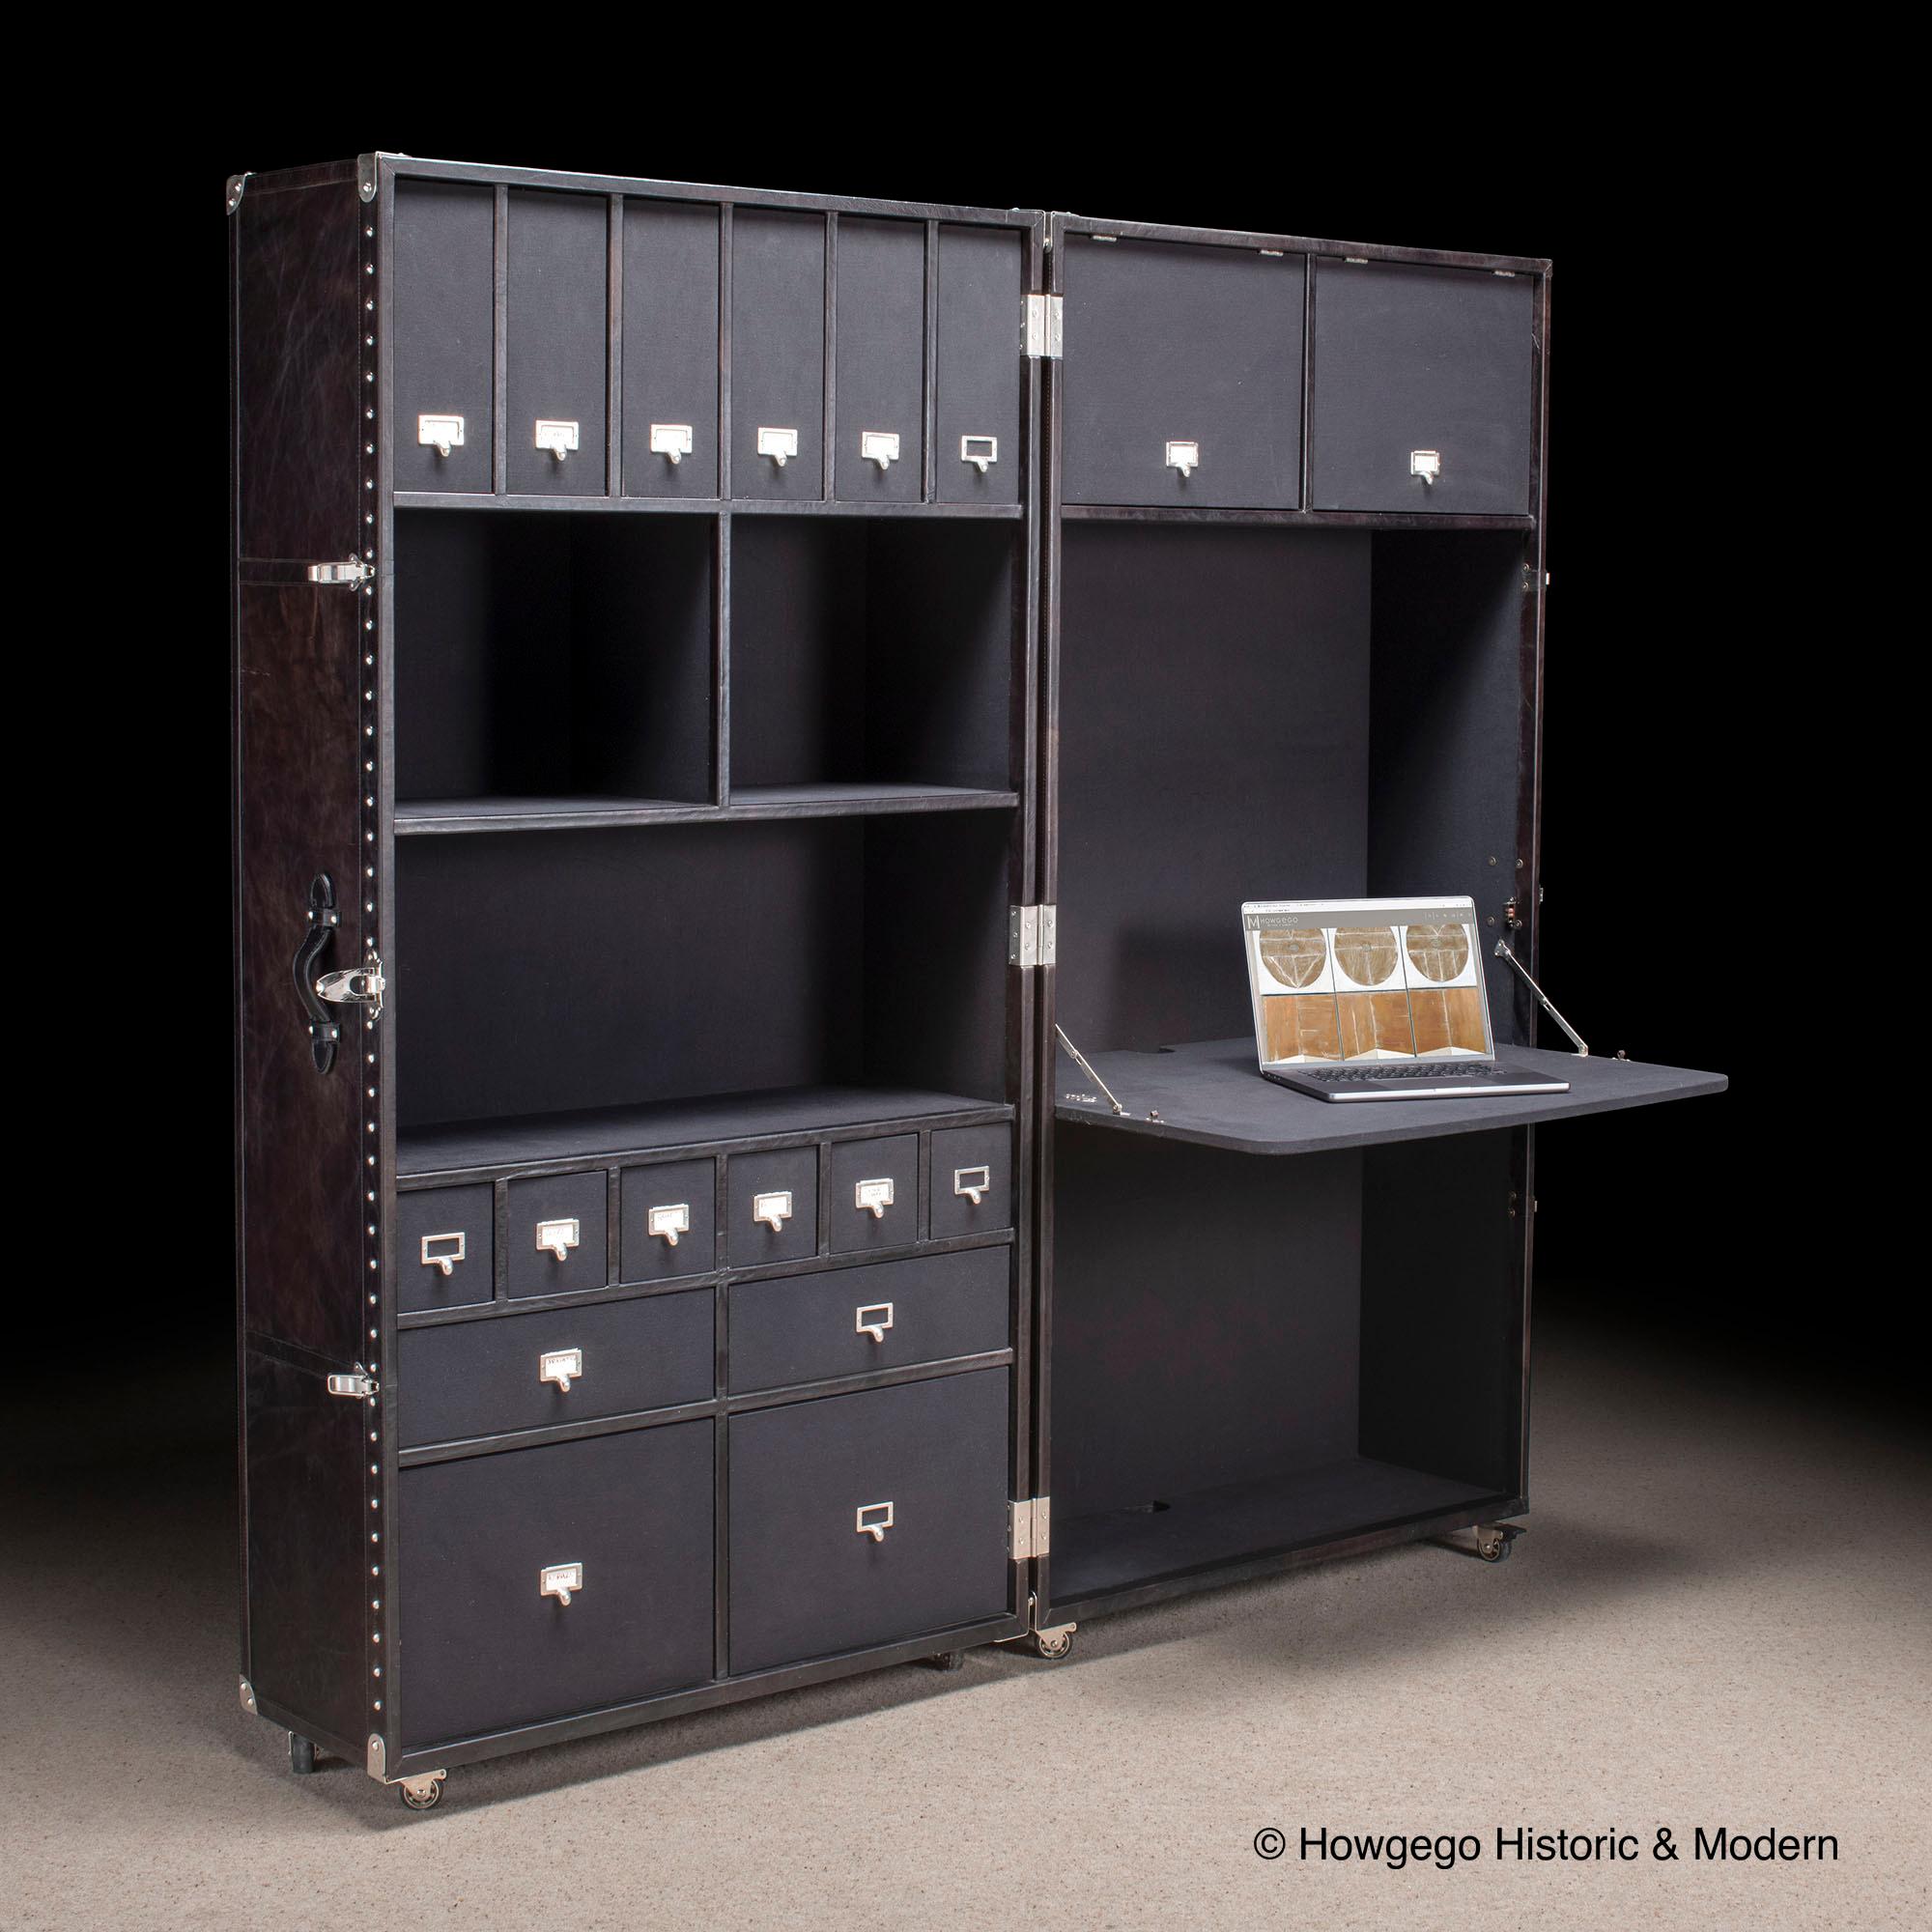 Travel and take your work anywhere, anytime
Funky, fun, ergonomic, mobile office, compact bureau or bookcase for the home or travel to exhibitions or sites
Vintage trunk stylish and beautifully made by Restoration Hardware for Timothy Oulton, no